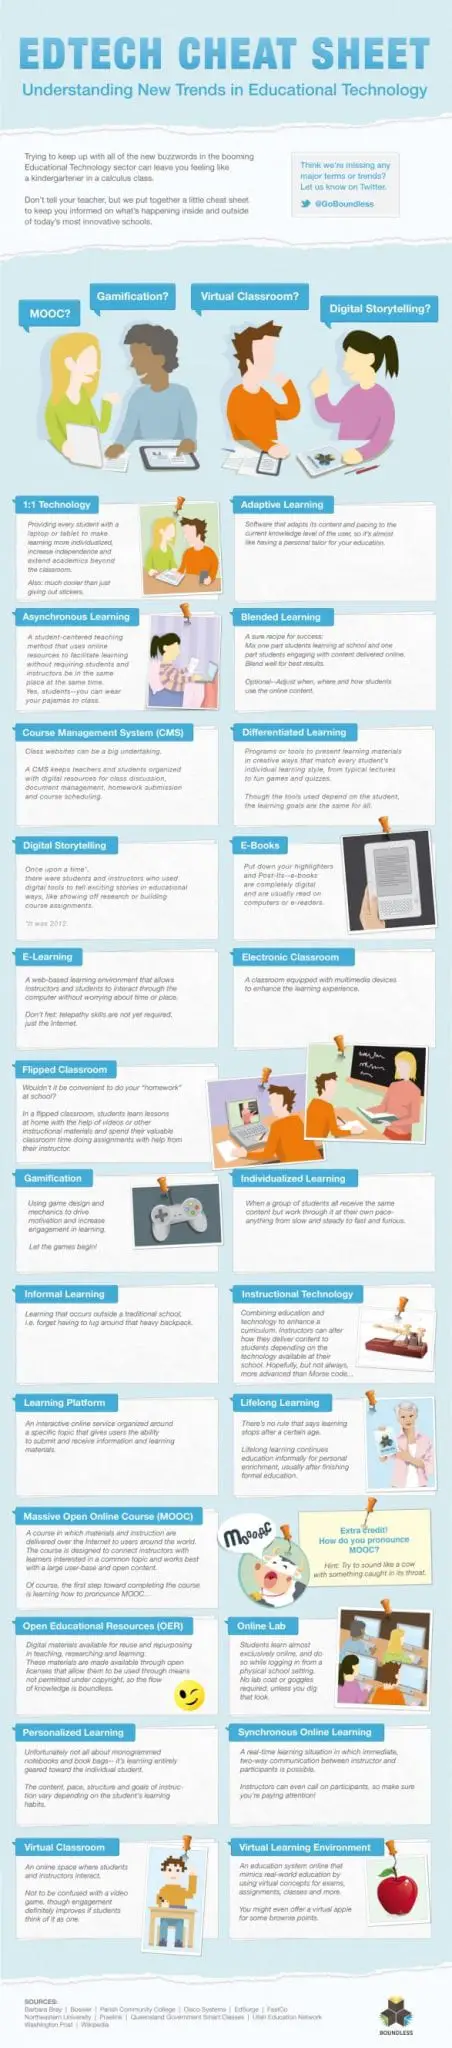 26 Educational Technologies Every Teacher and Student Should Know